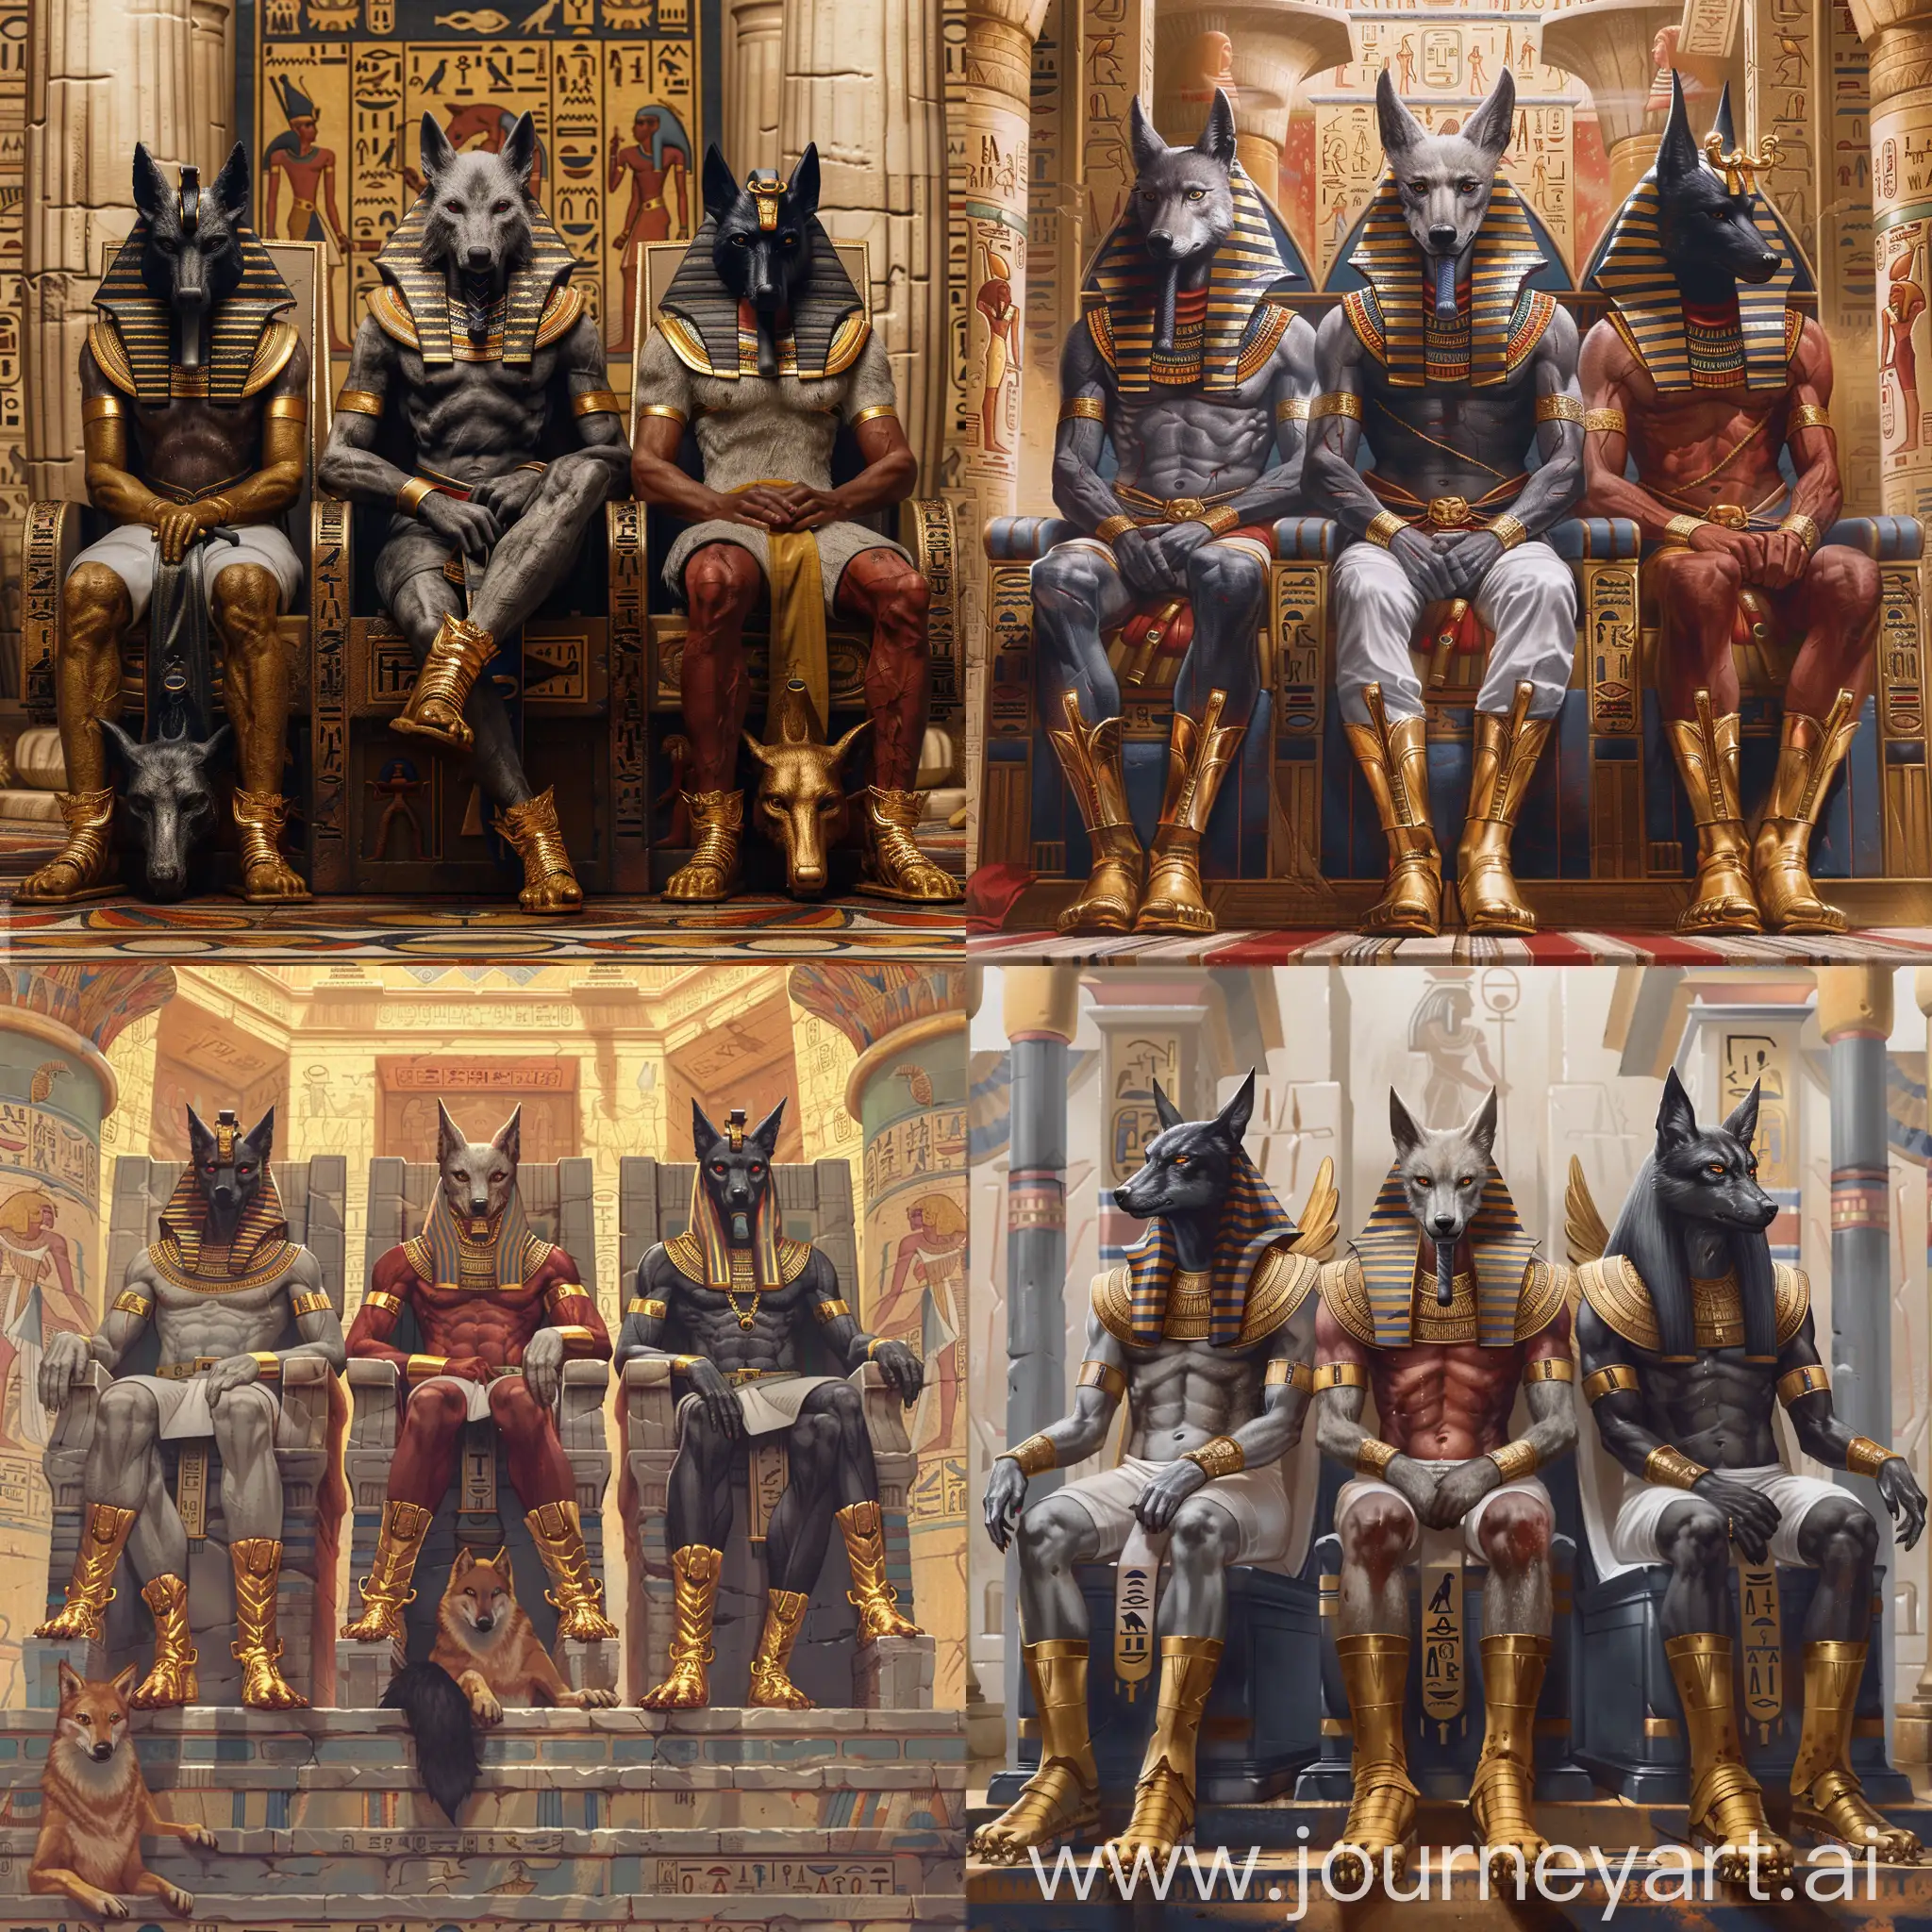 Egyptian-Deities-in-Regal-Attire-Posing-on-Thrones-within-a-Majestic-Temple